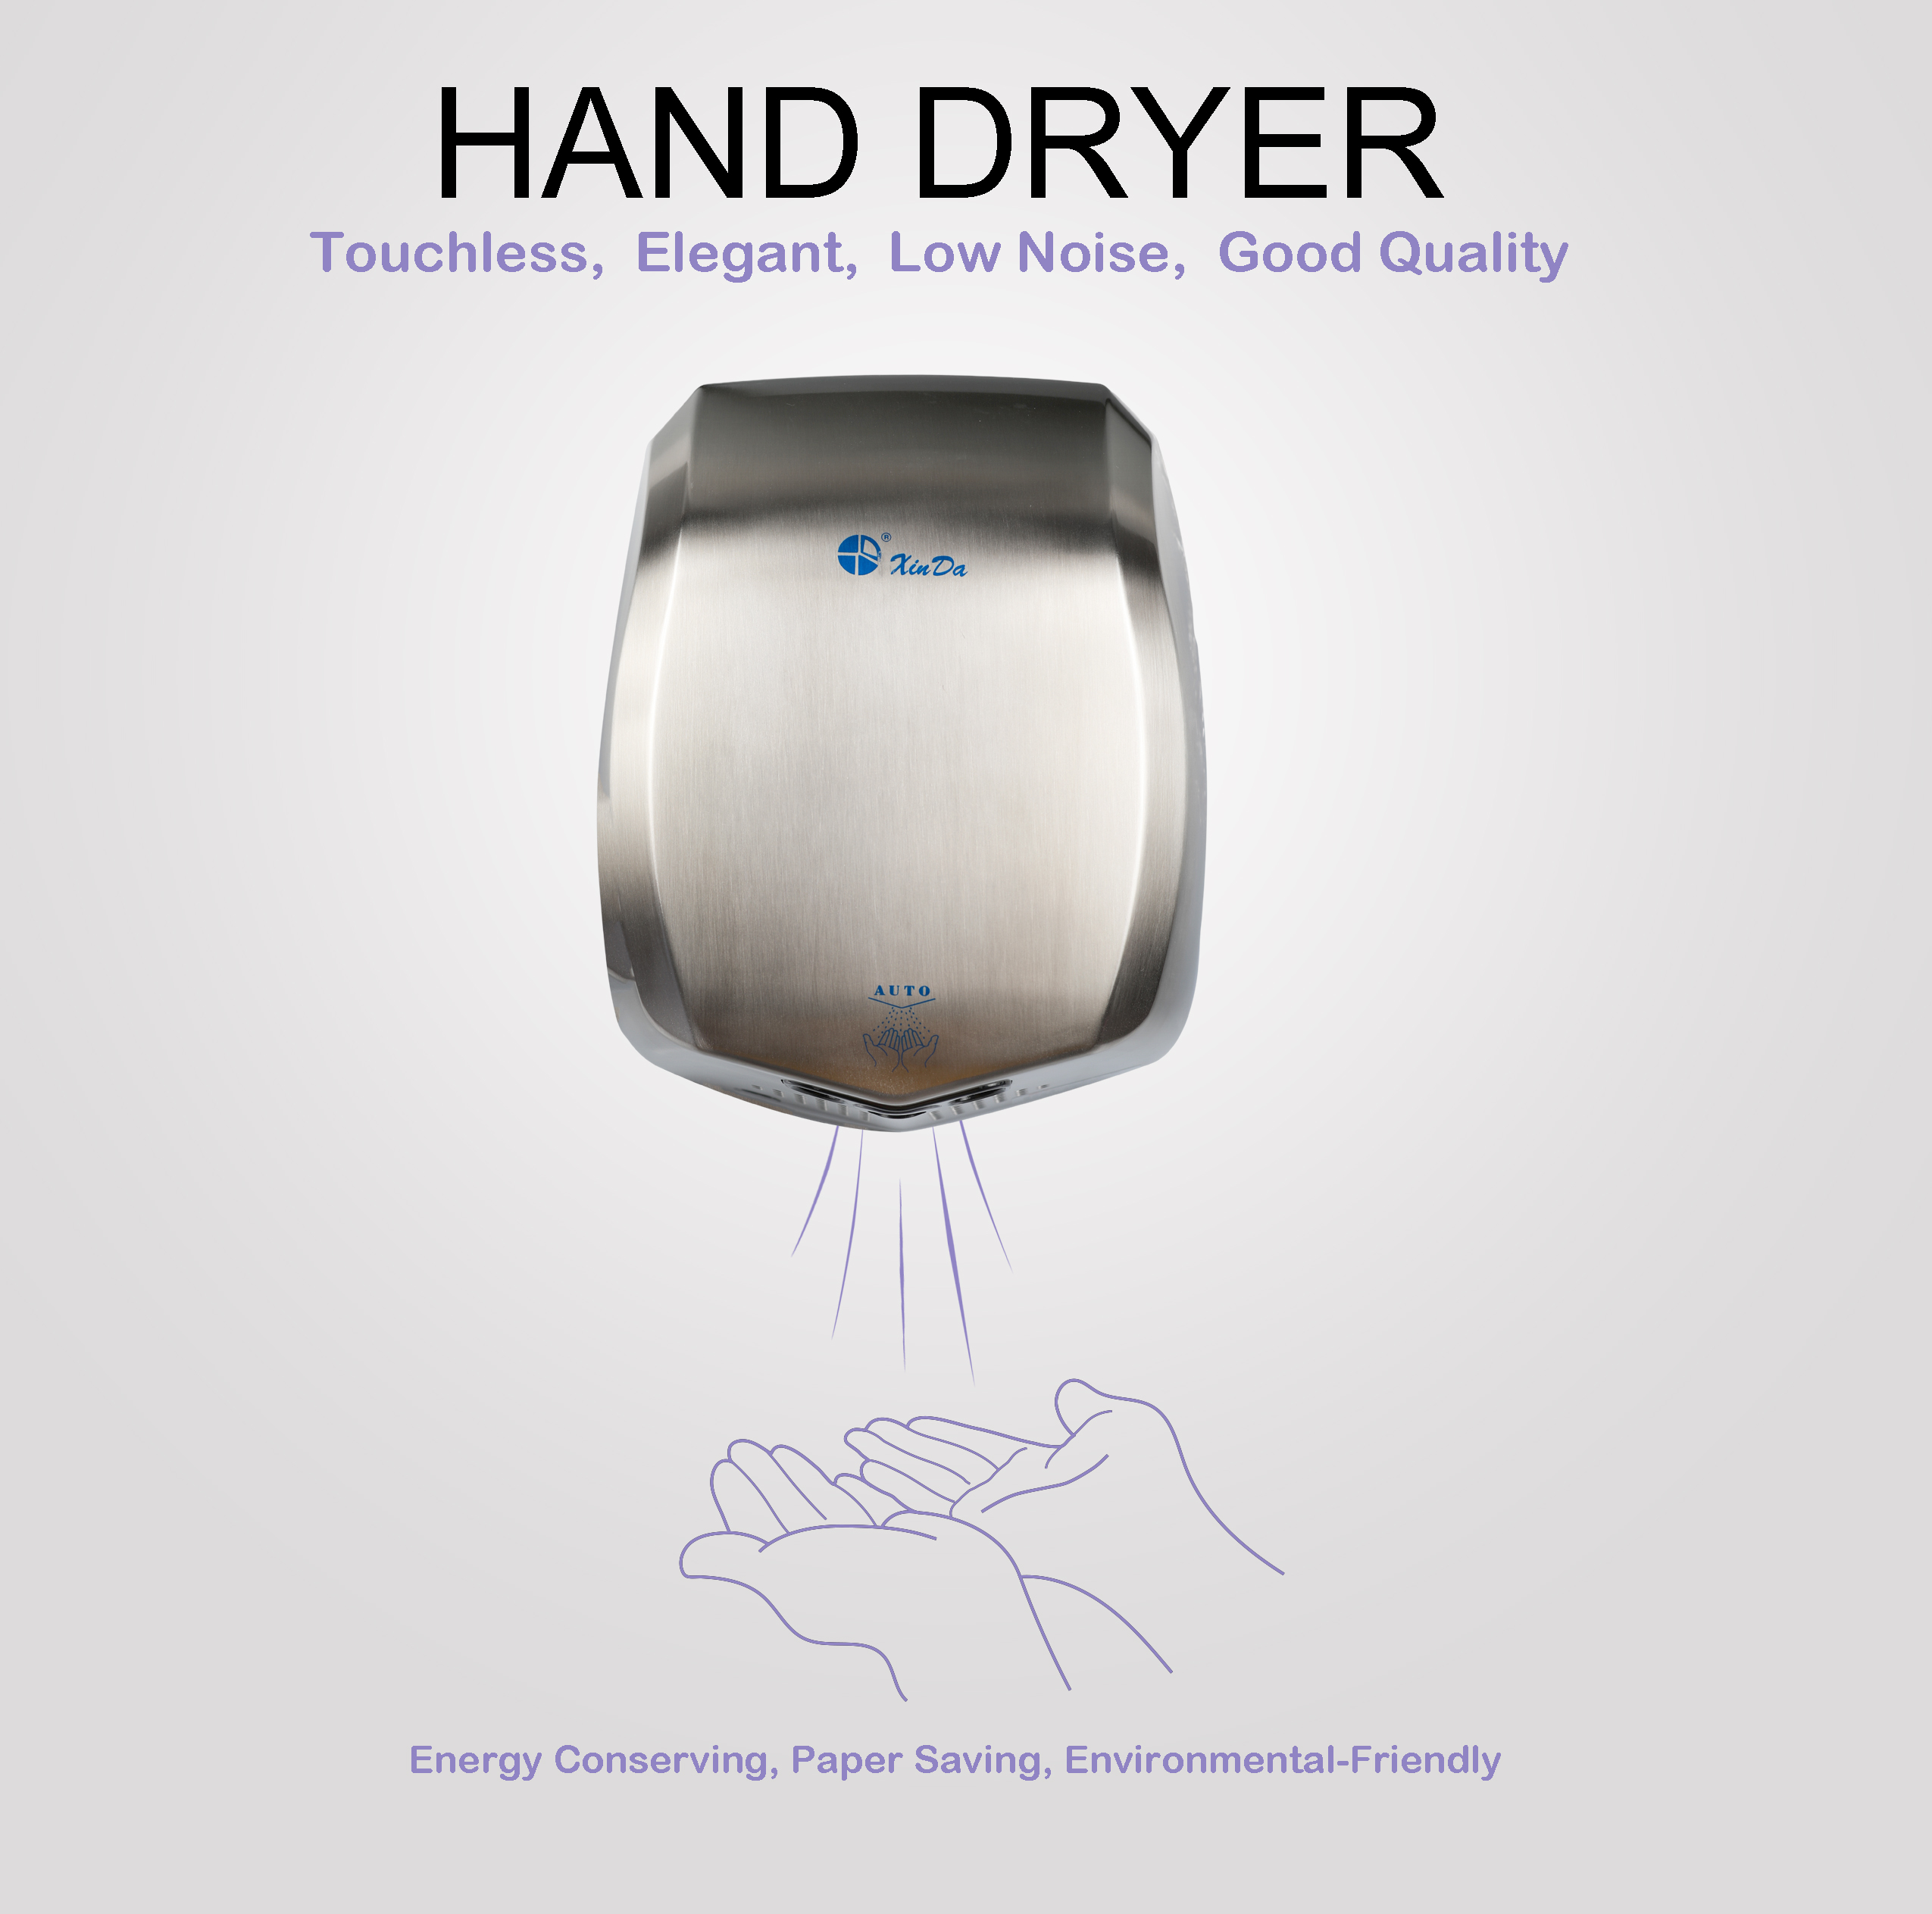 The XinDa GSQ60K Professional Commercial ABS Electric High Speed Automatic Hand Dryer Cool And Warm Wind Hand Dryer